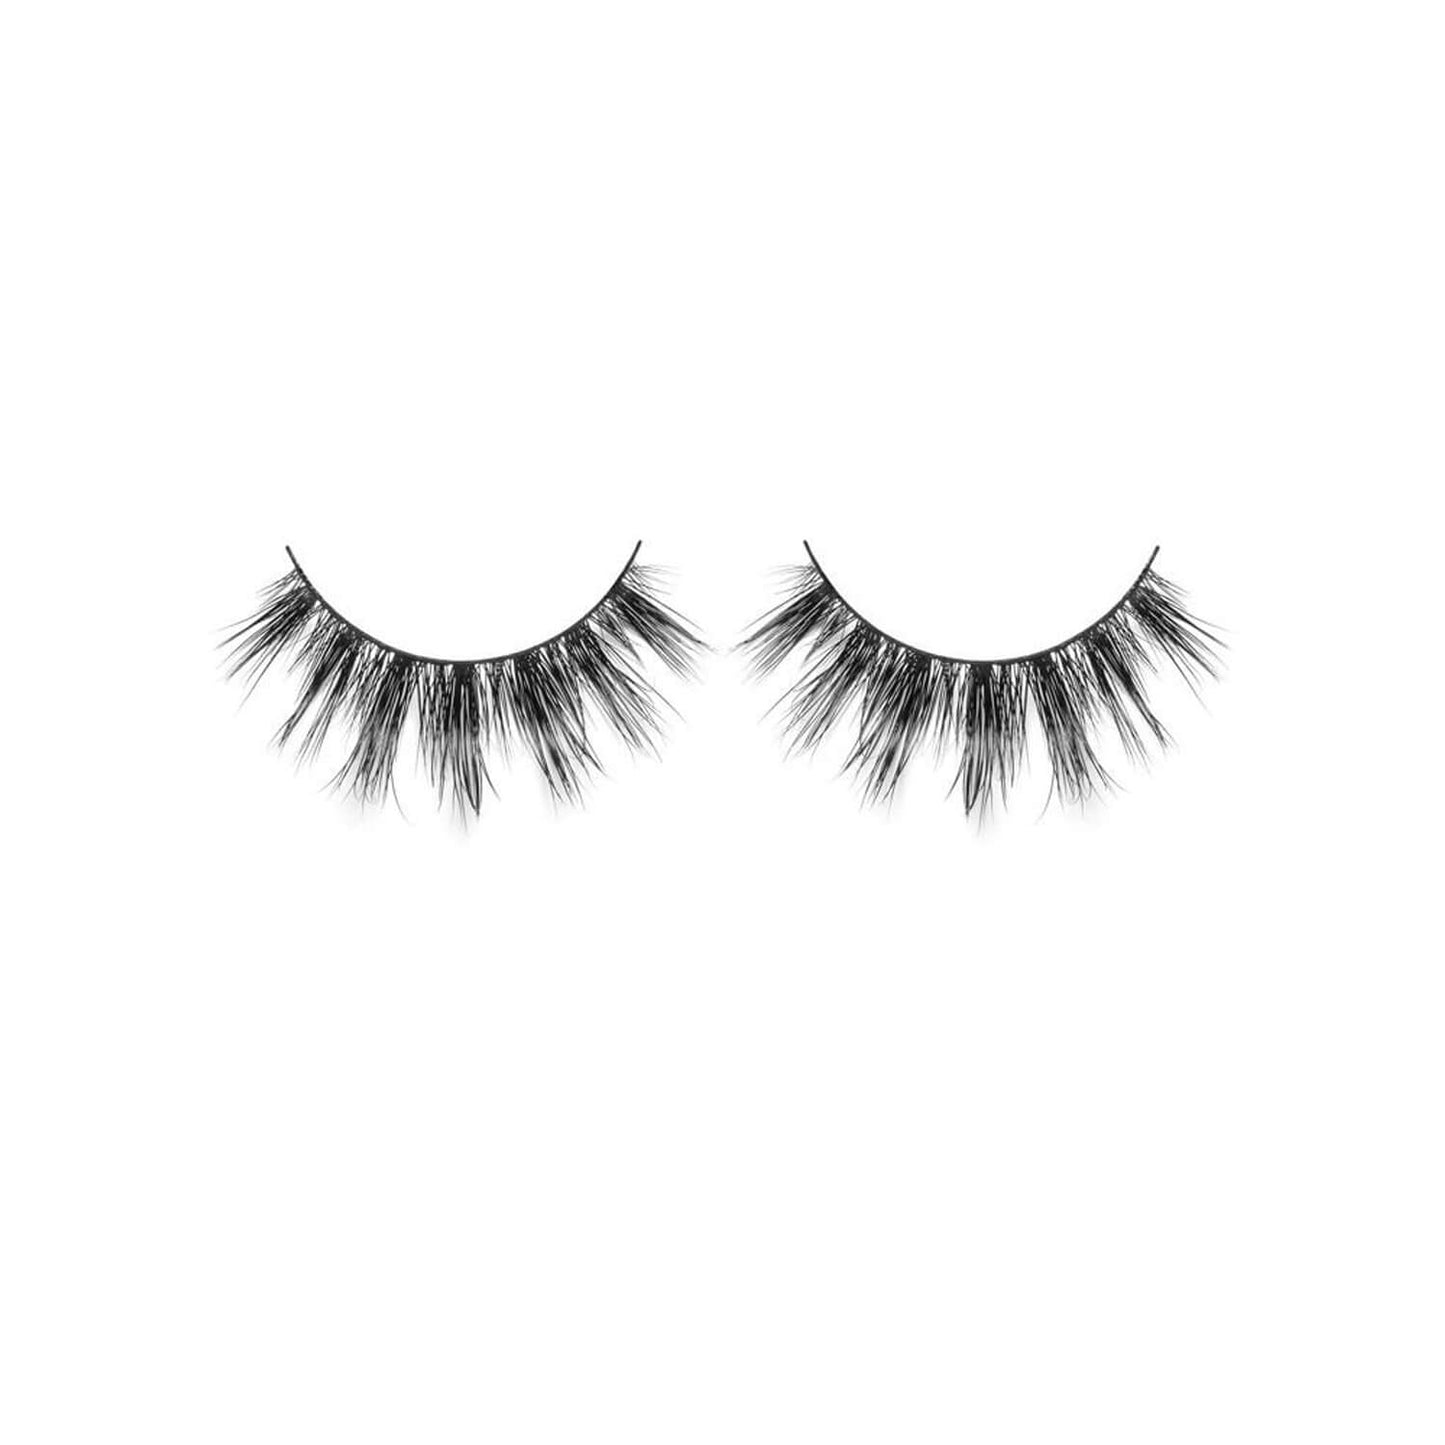 Lilly Lashes Monaco 3D Mink Lashes